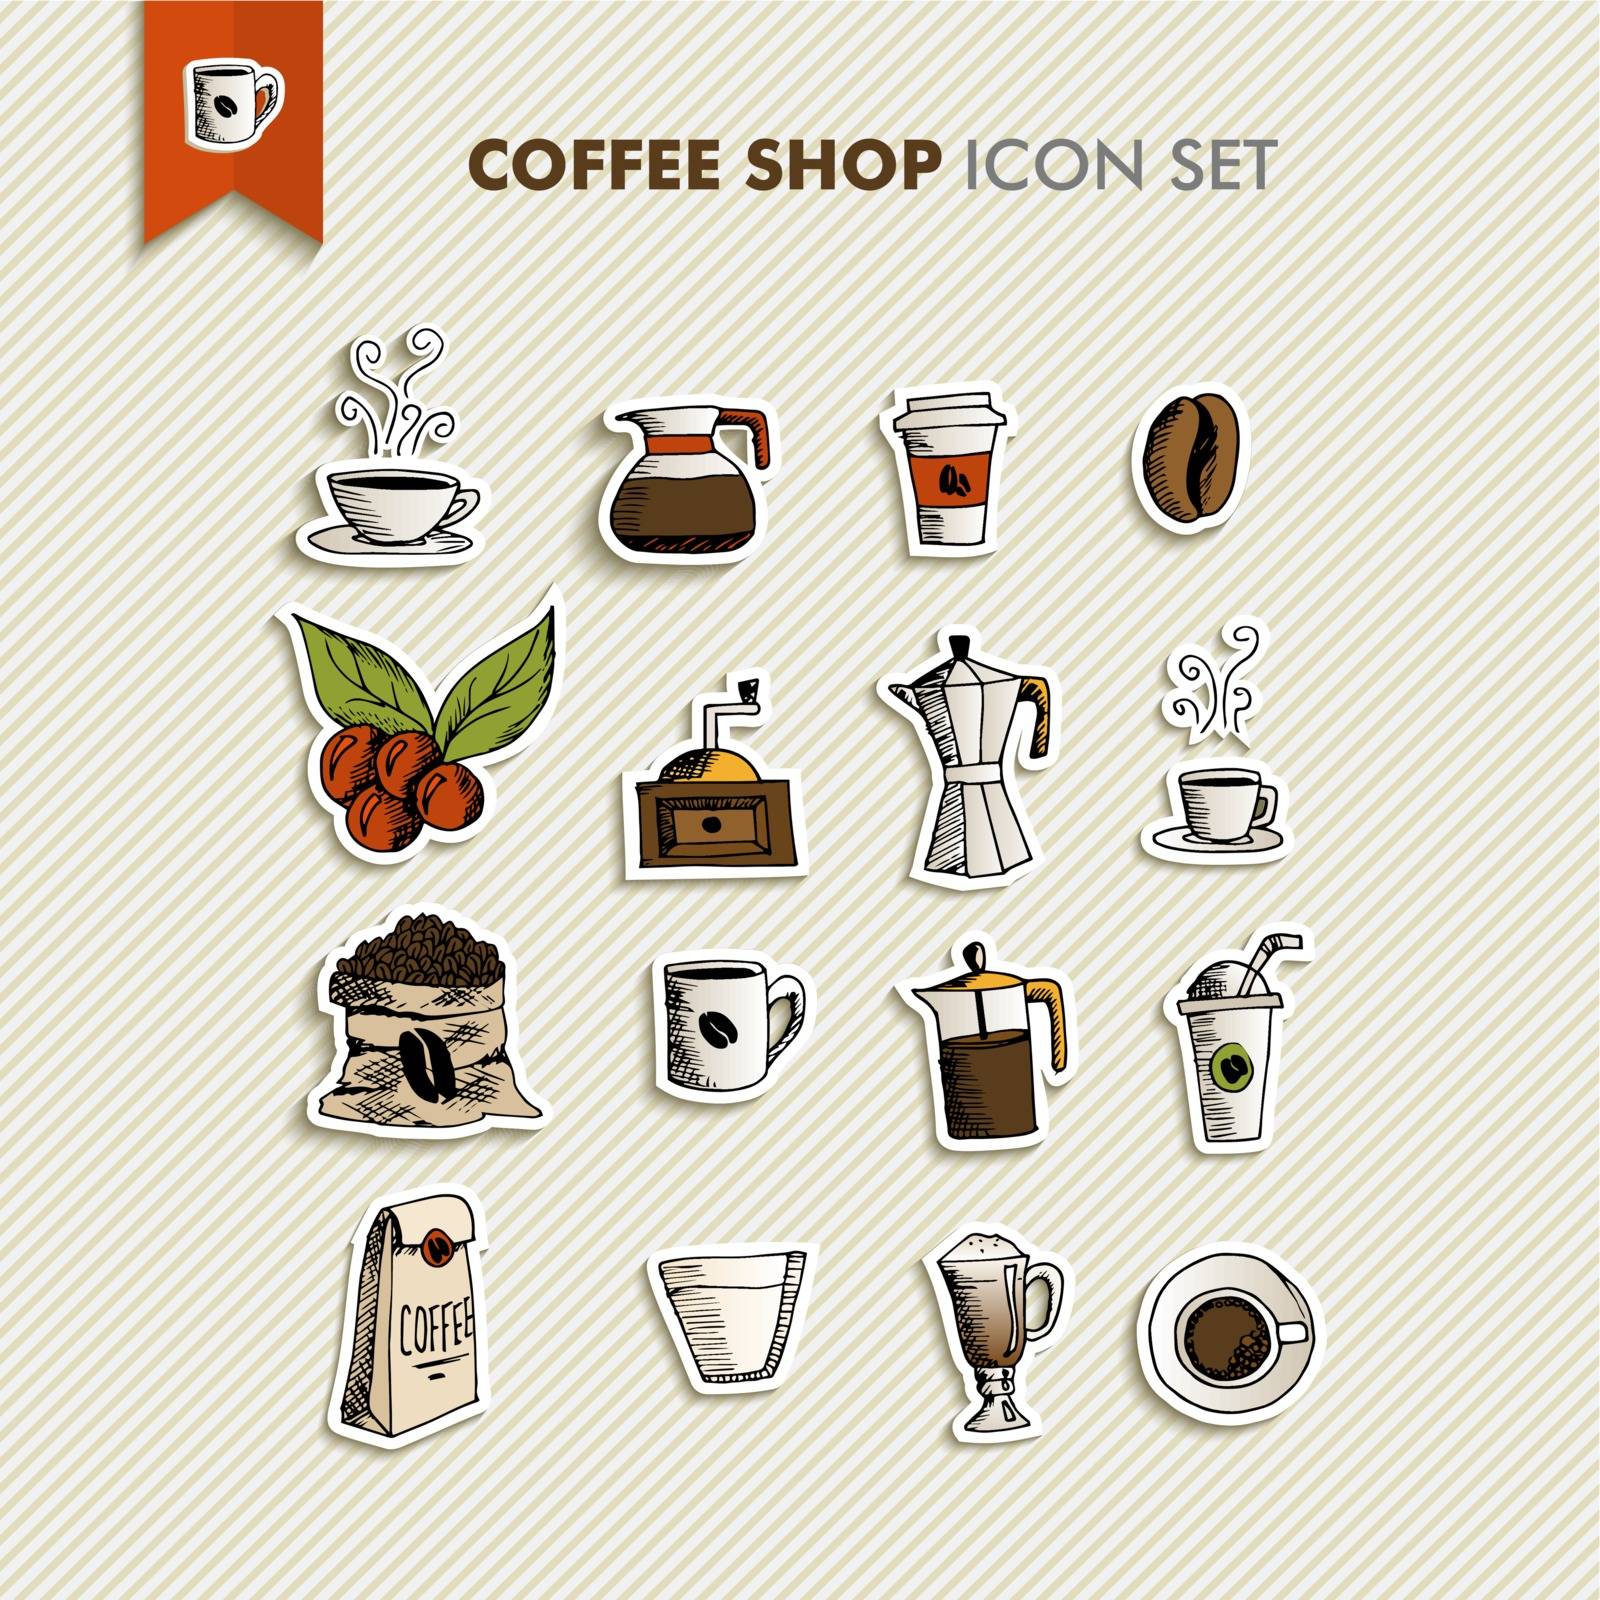 Coffee shop icons set illustration by cienpies